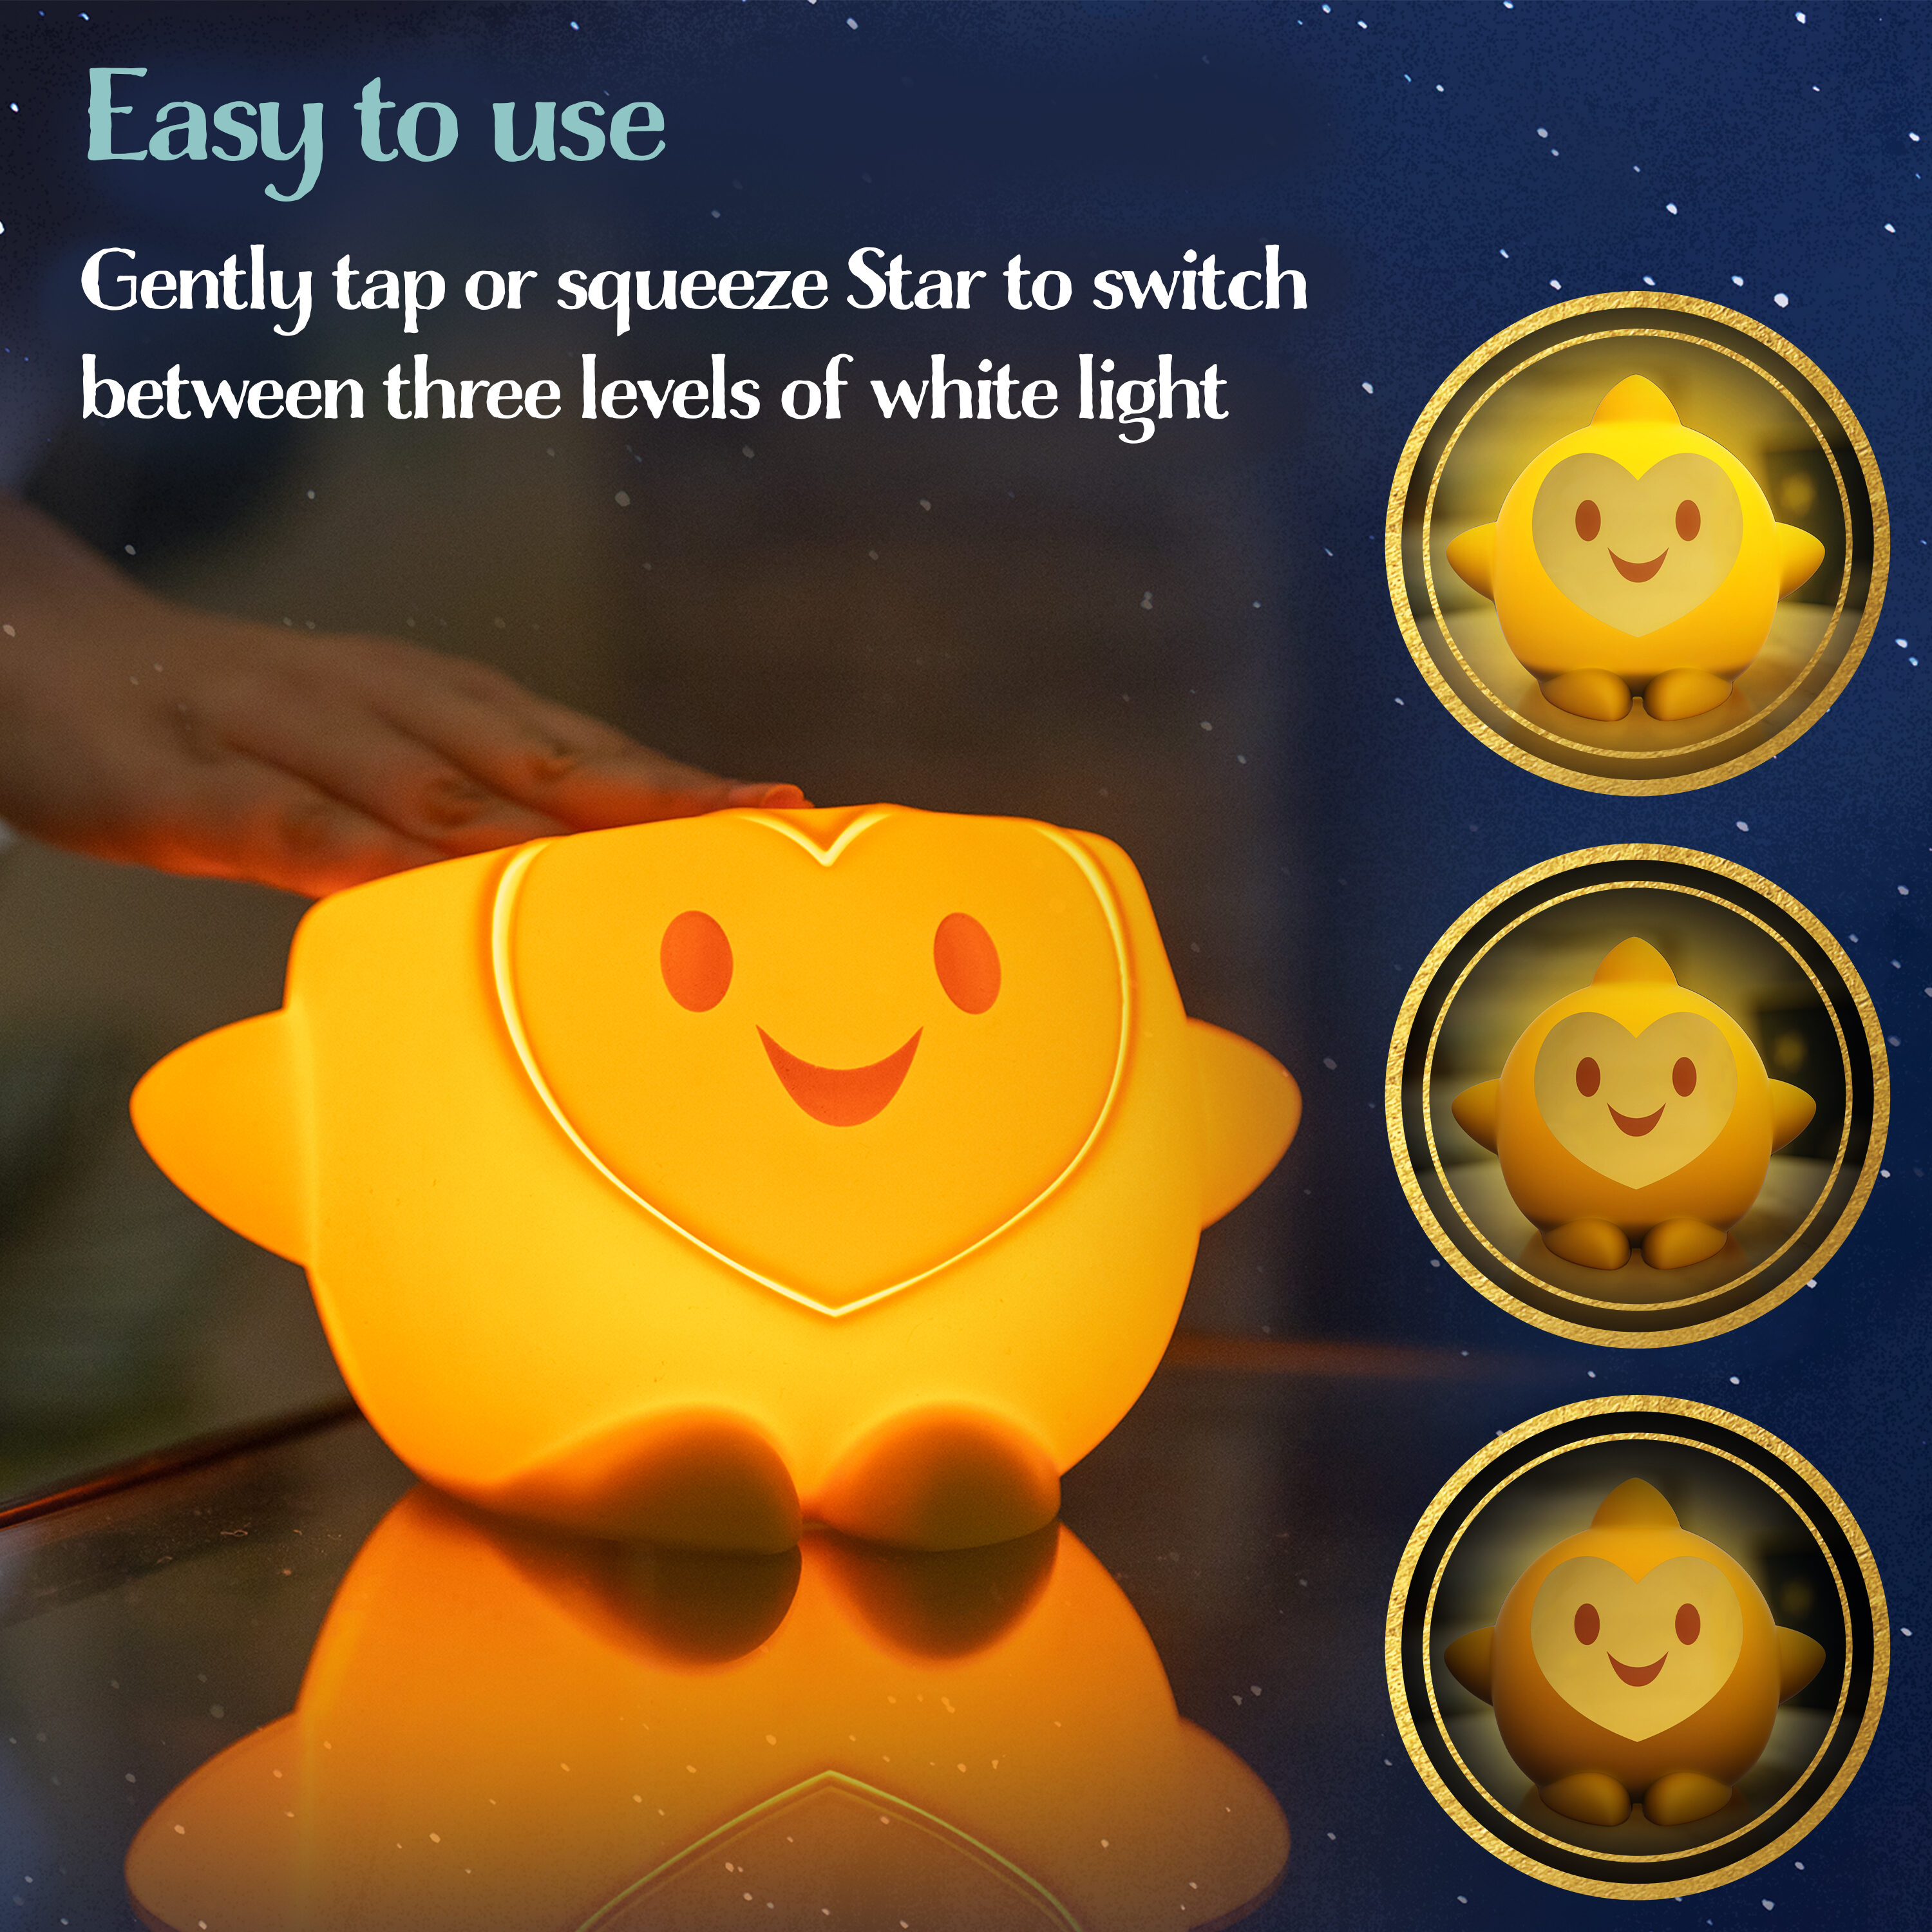  Disney Wish Hug & Wish Star 10-Inch Glowing Plush Star,  Soothing Night Light, Officially Licensed Kids Toys for Ages 3 Up by Just  Play : Toys & Games